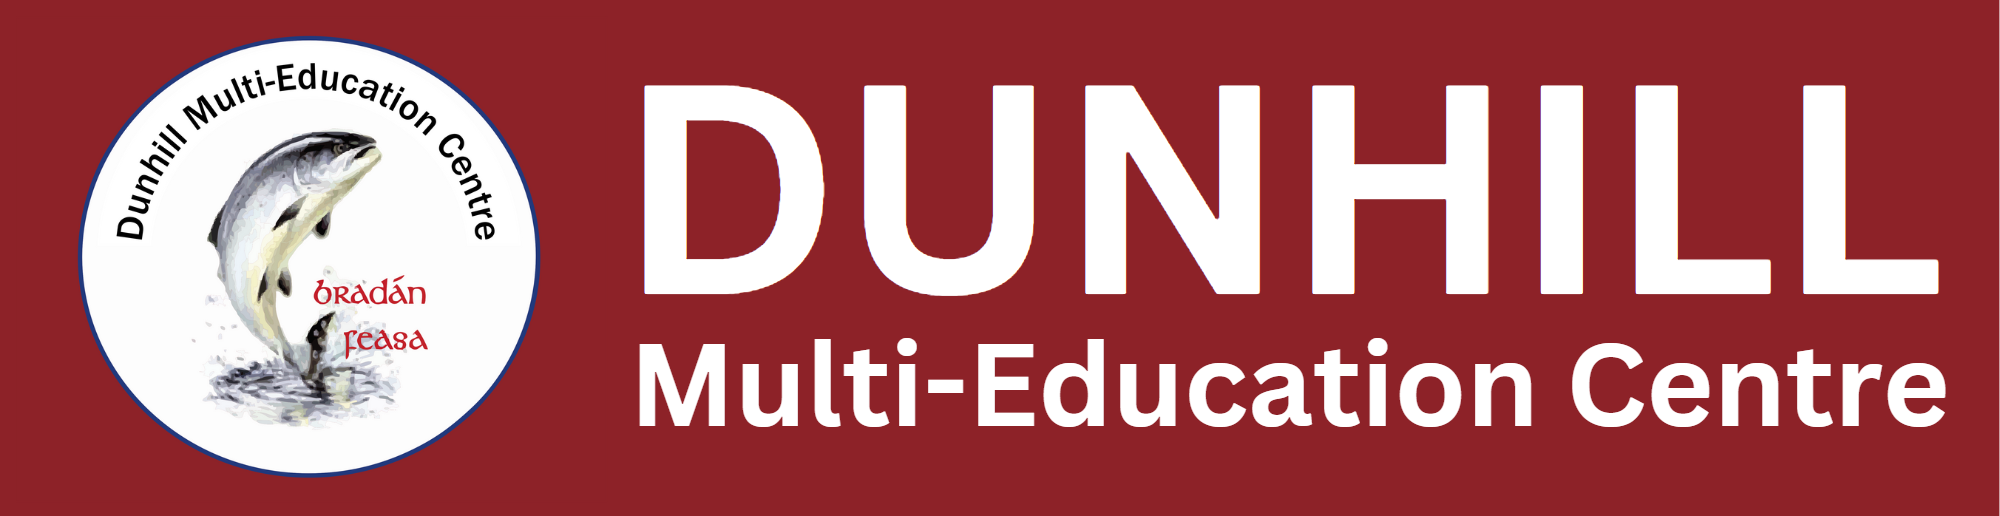 Dunhill Multi-Education Centre Logo featuring the Salmon of Knowedge